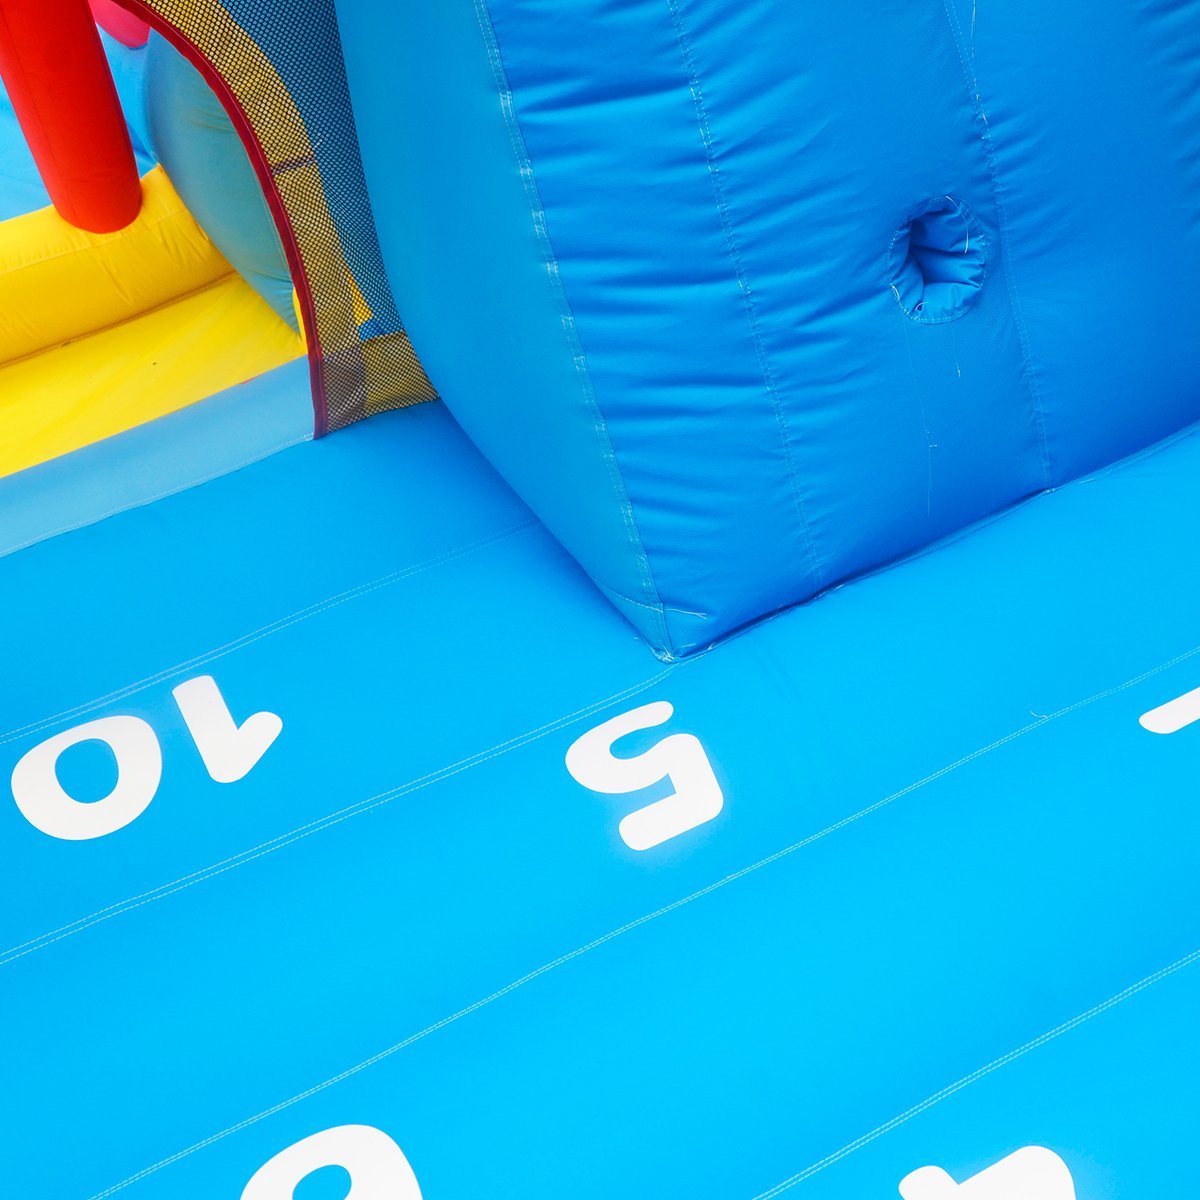 Fun games to play Counting numbers on jumping castle